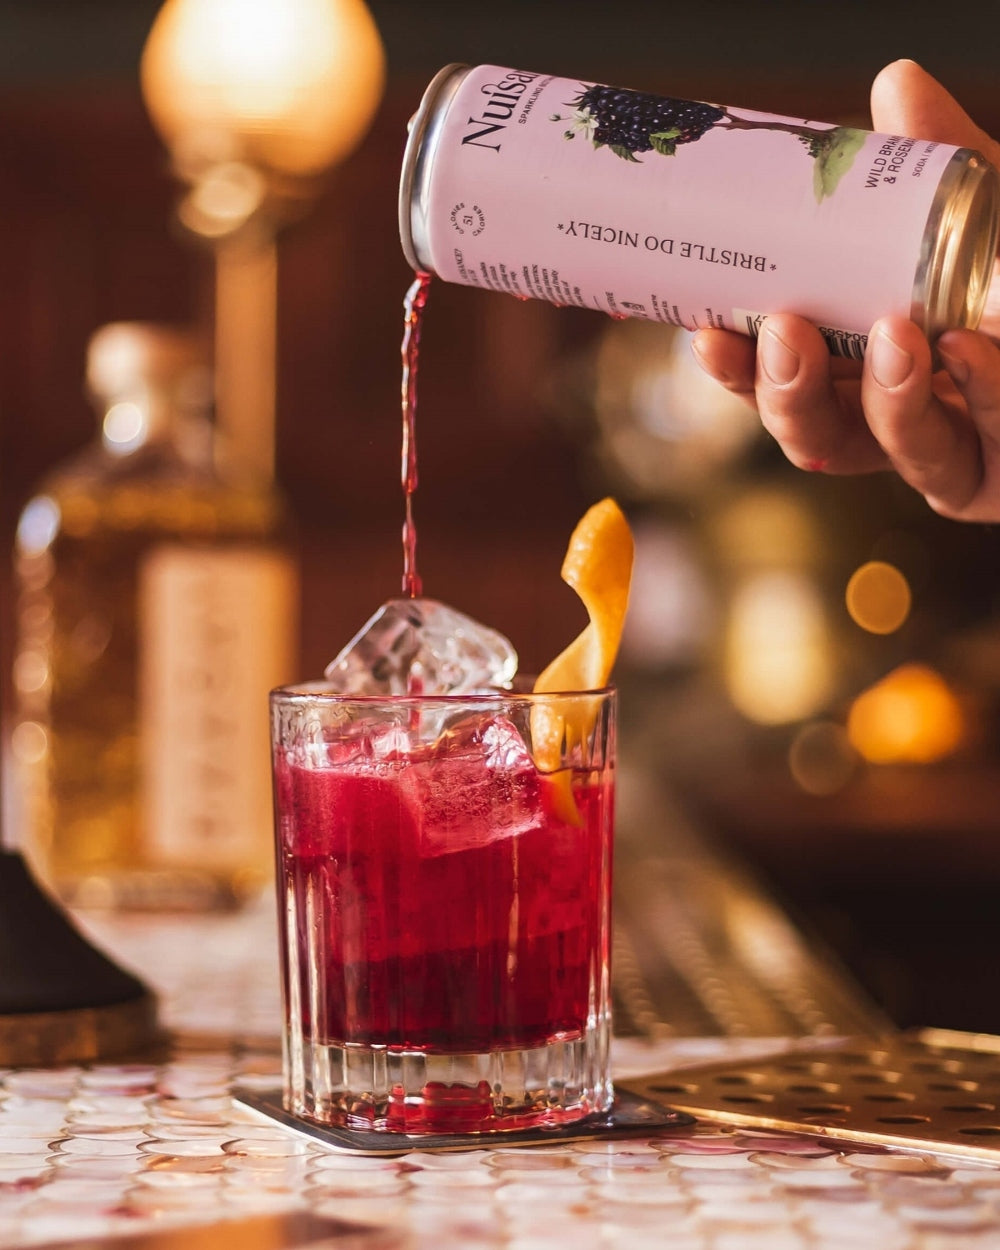 A cold refreshing glass of gin is topped with a refreshing can of premium Bramble and Rosemary botanical soft drink from Scotland-based drinks start-up brand  Nuisance drinks.